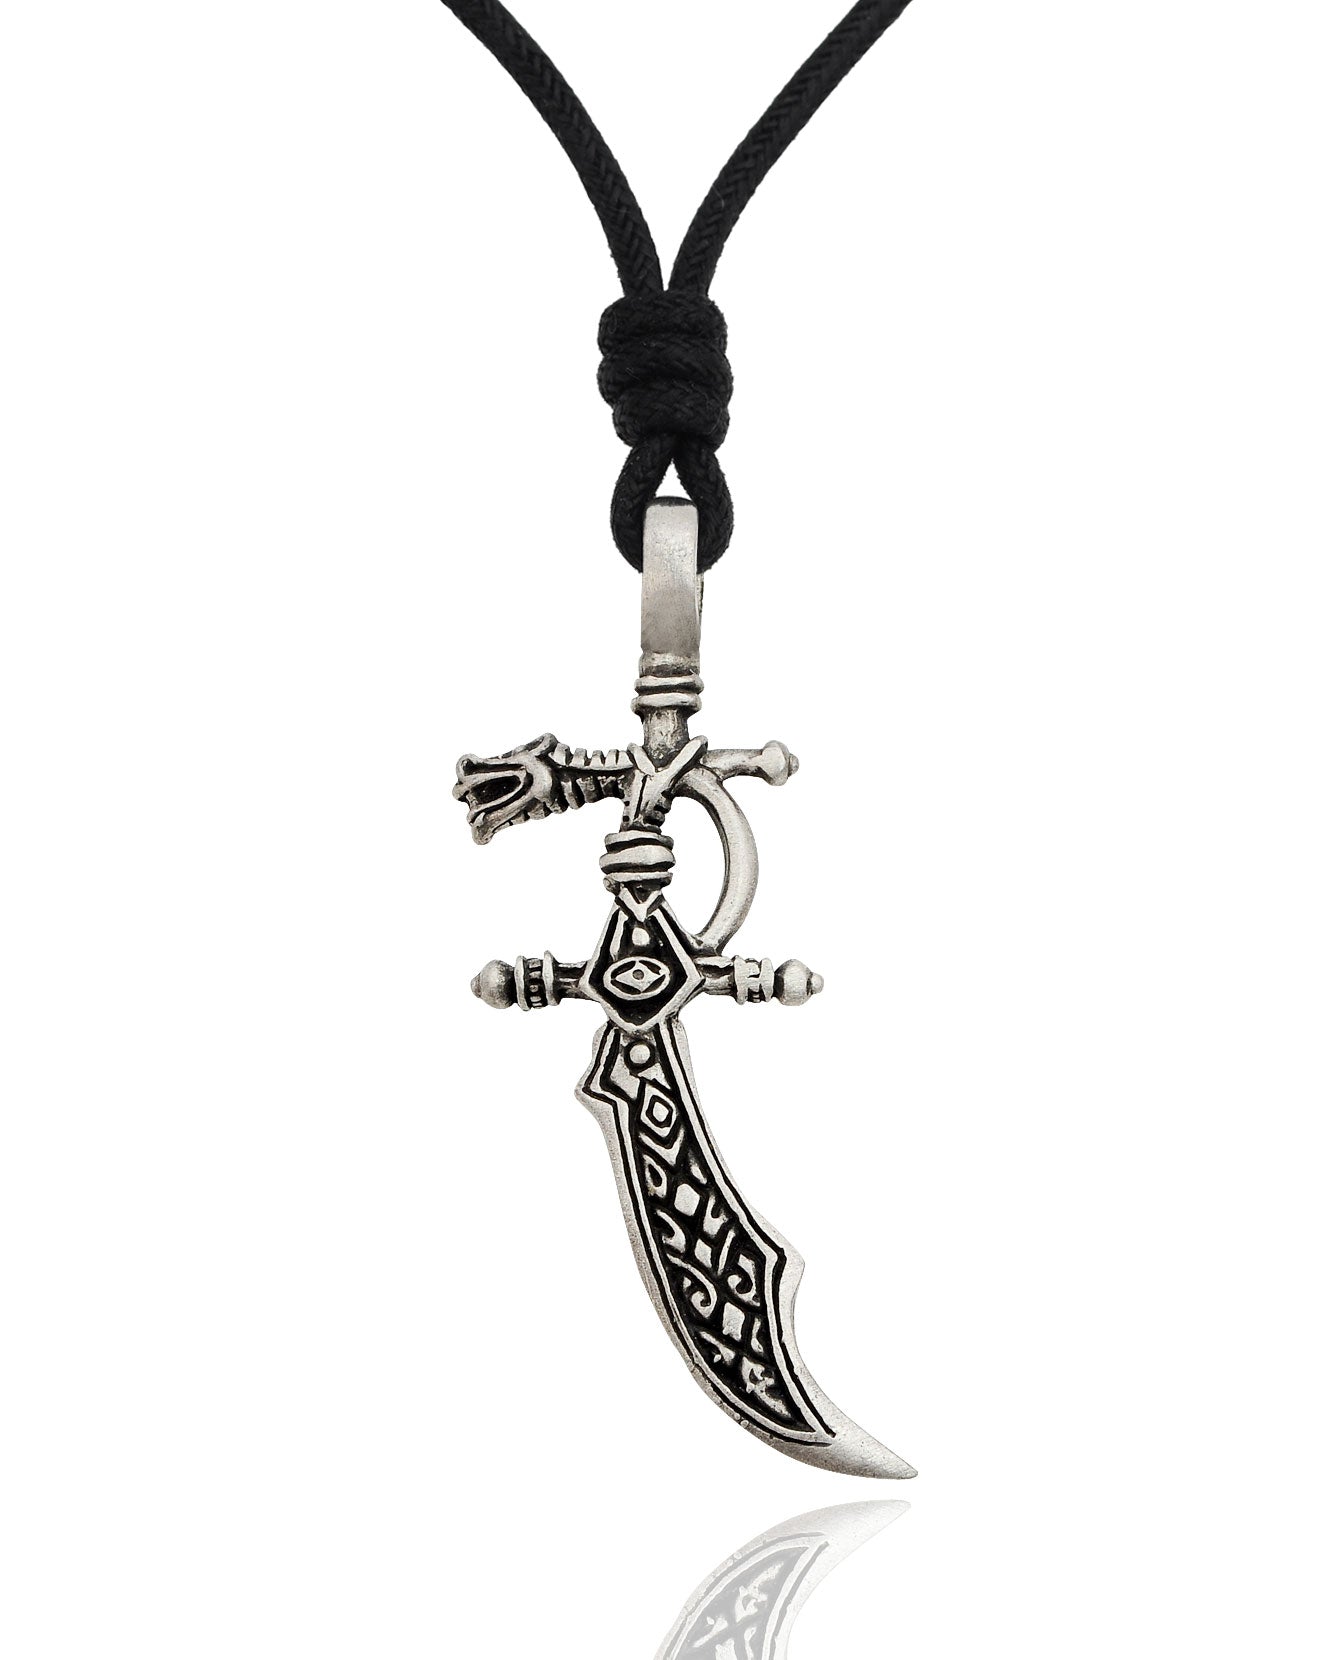 Dragon Sword Silver Pewter Charm Necklace Pendant Jewelry